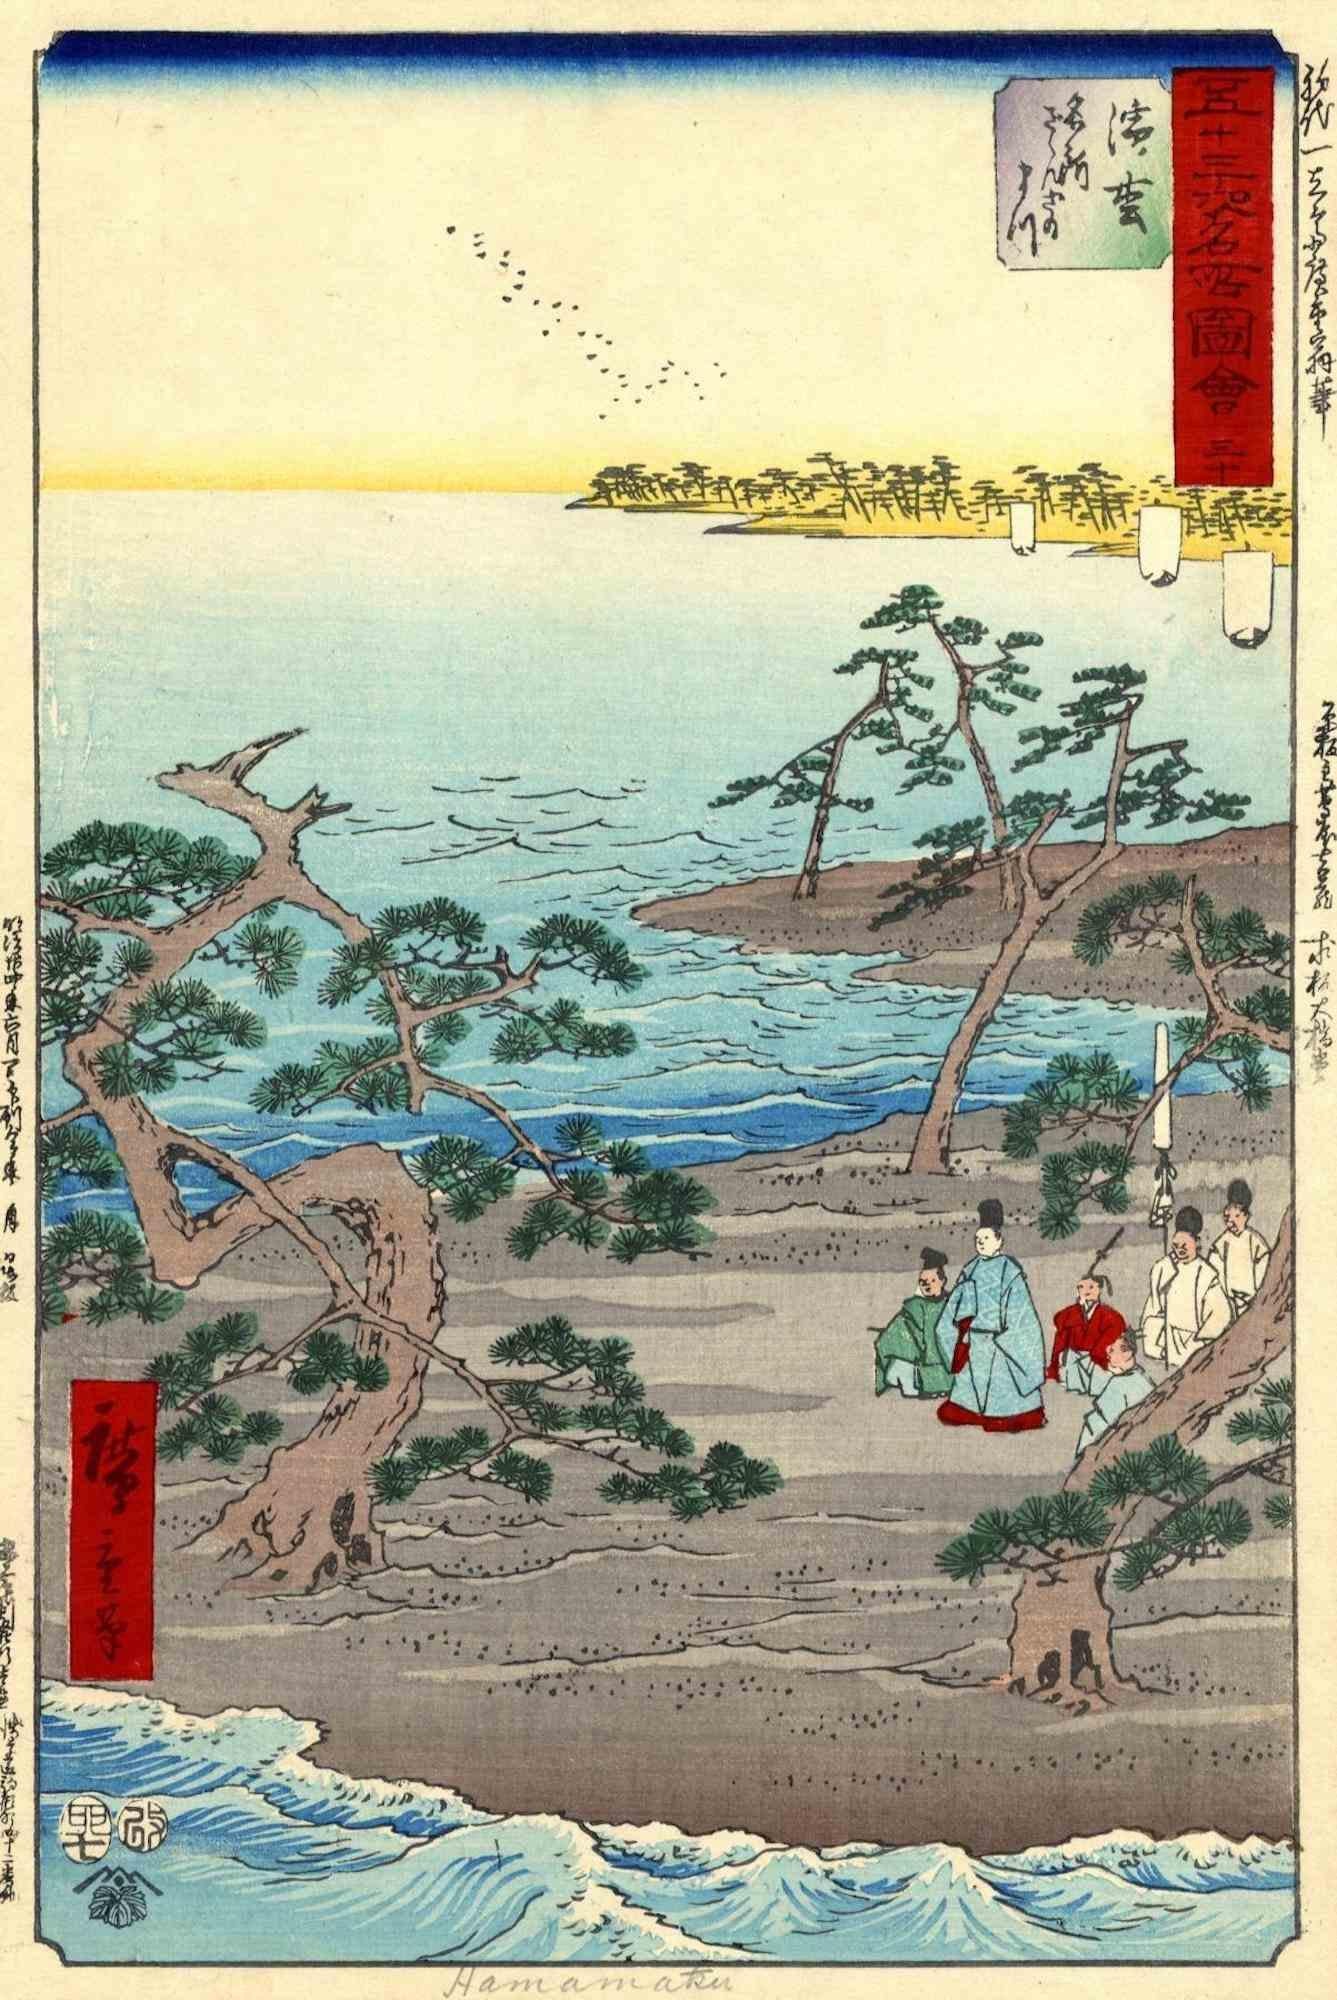 Hamamatsu Station is an original modern artwork realized by Utagawa Hiroshige (after) (1797 – 12 October 1858) in 1891.

Woodcut Print Oban Format.

Reprint 1891. From the series "Gojusan tsugi meisho zue" (55 stations of the Tokaido road), the